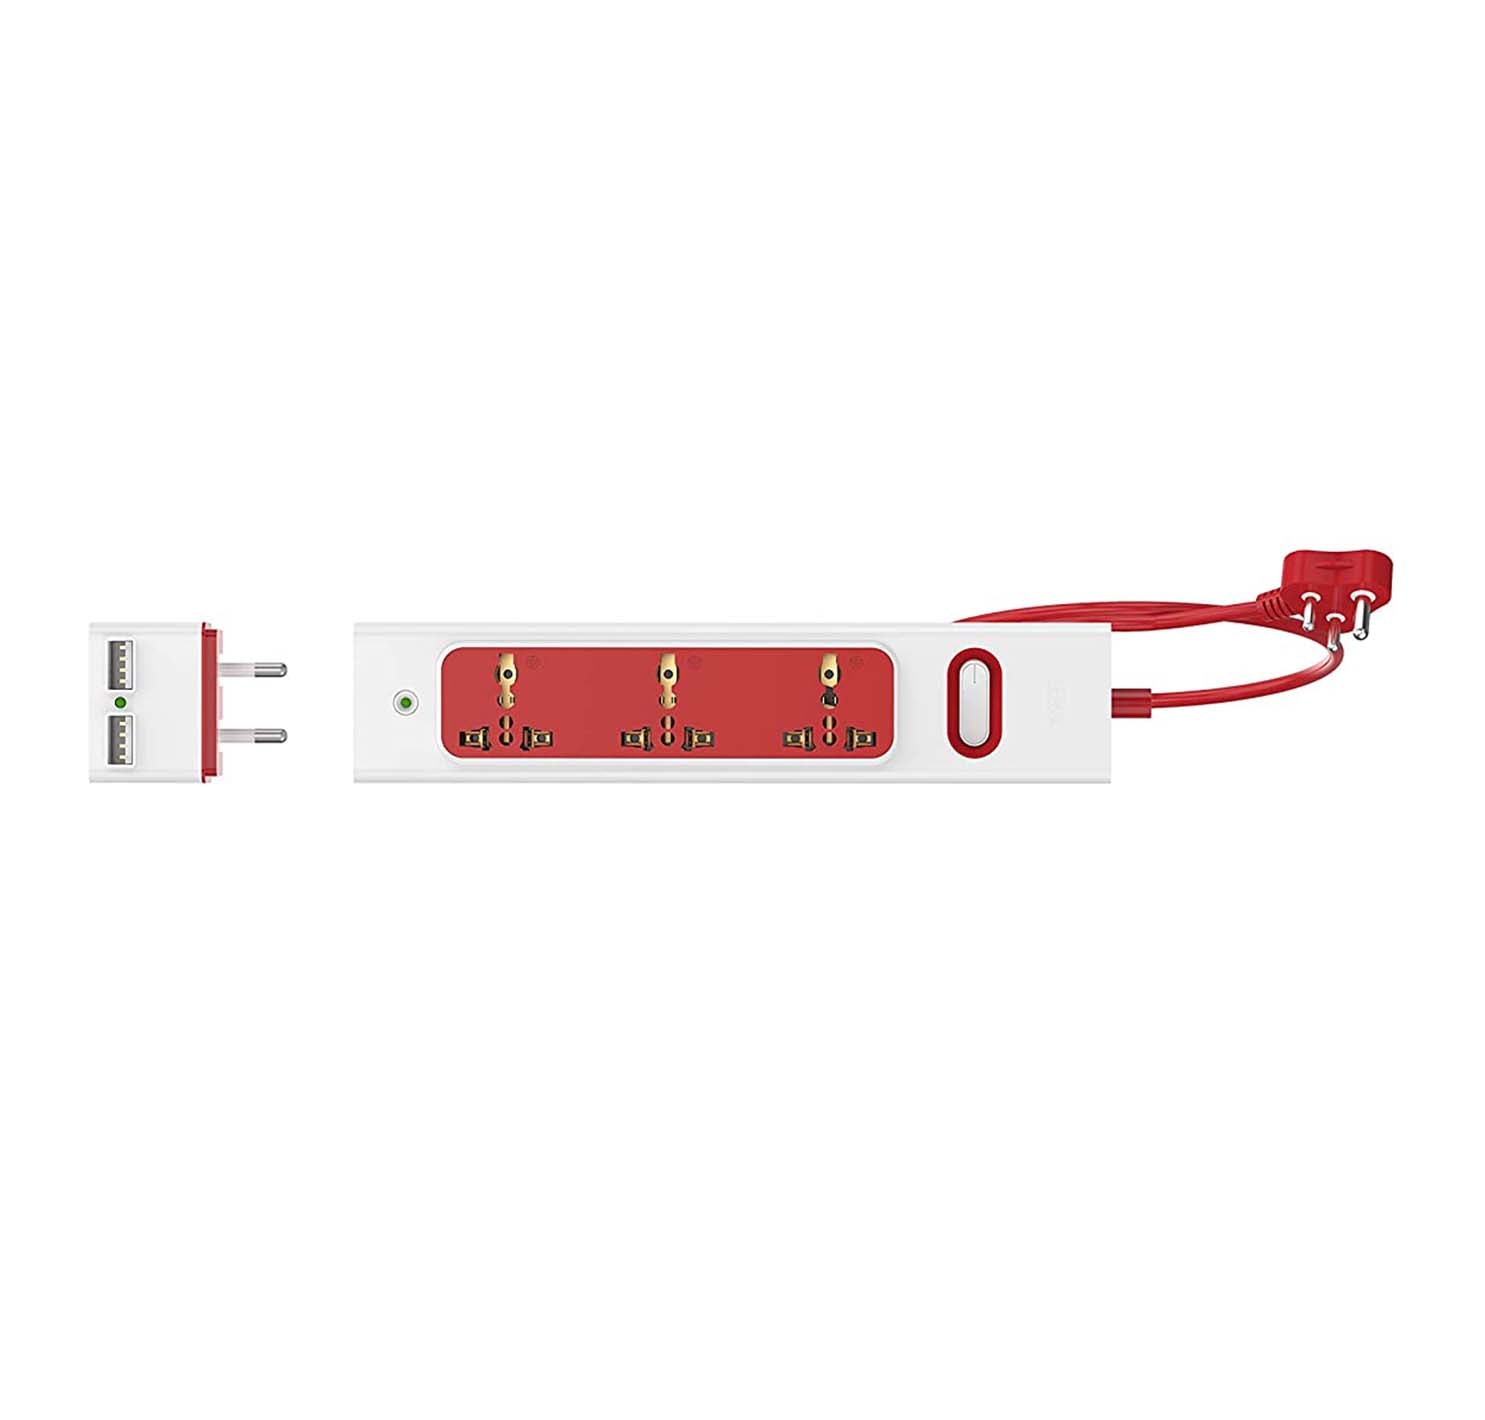 GM Lemoid 4+1 Spike Guard With USB Plug with 2 Meter Cable